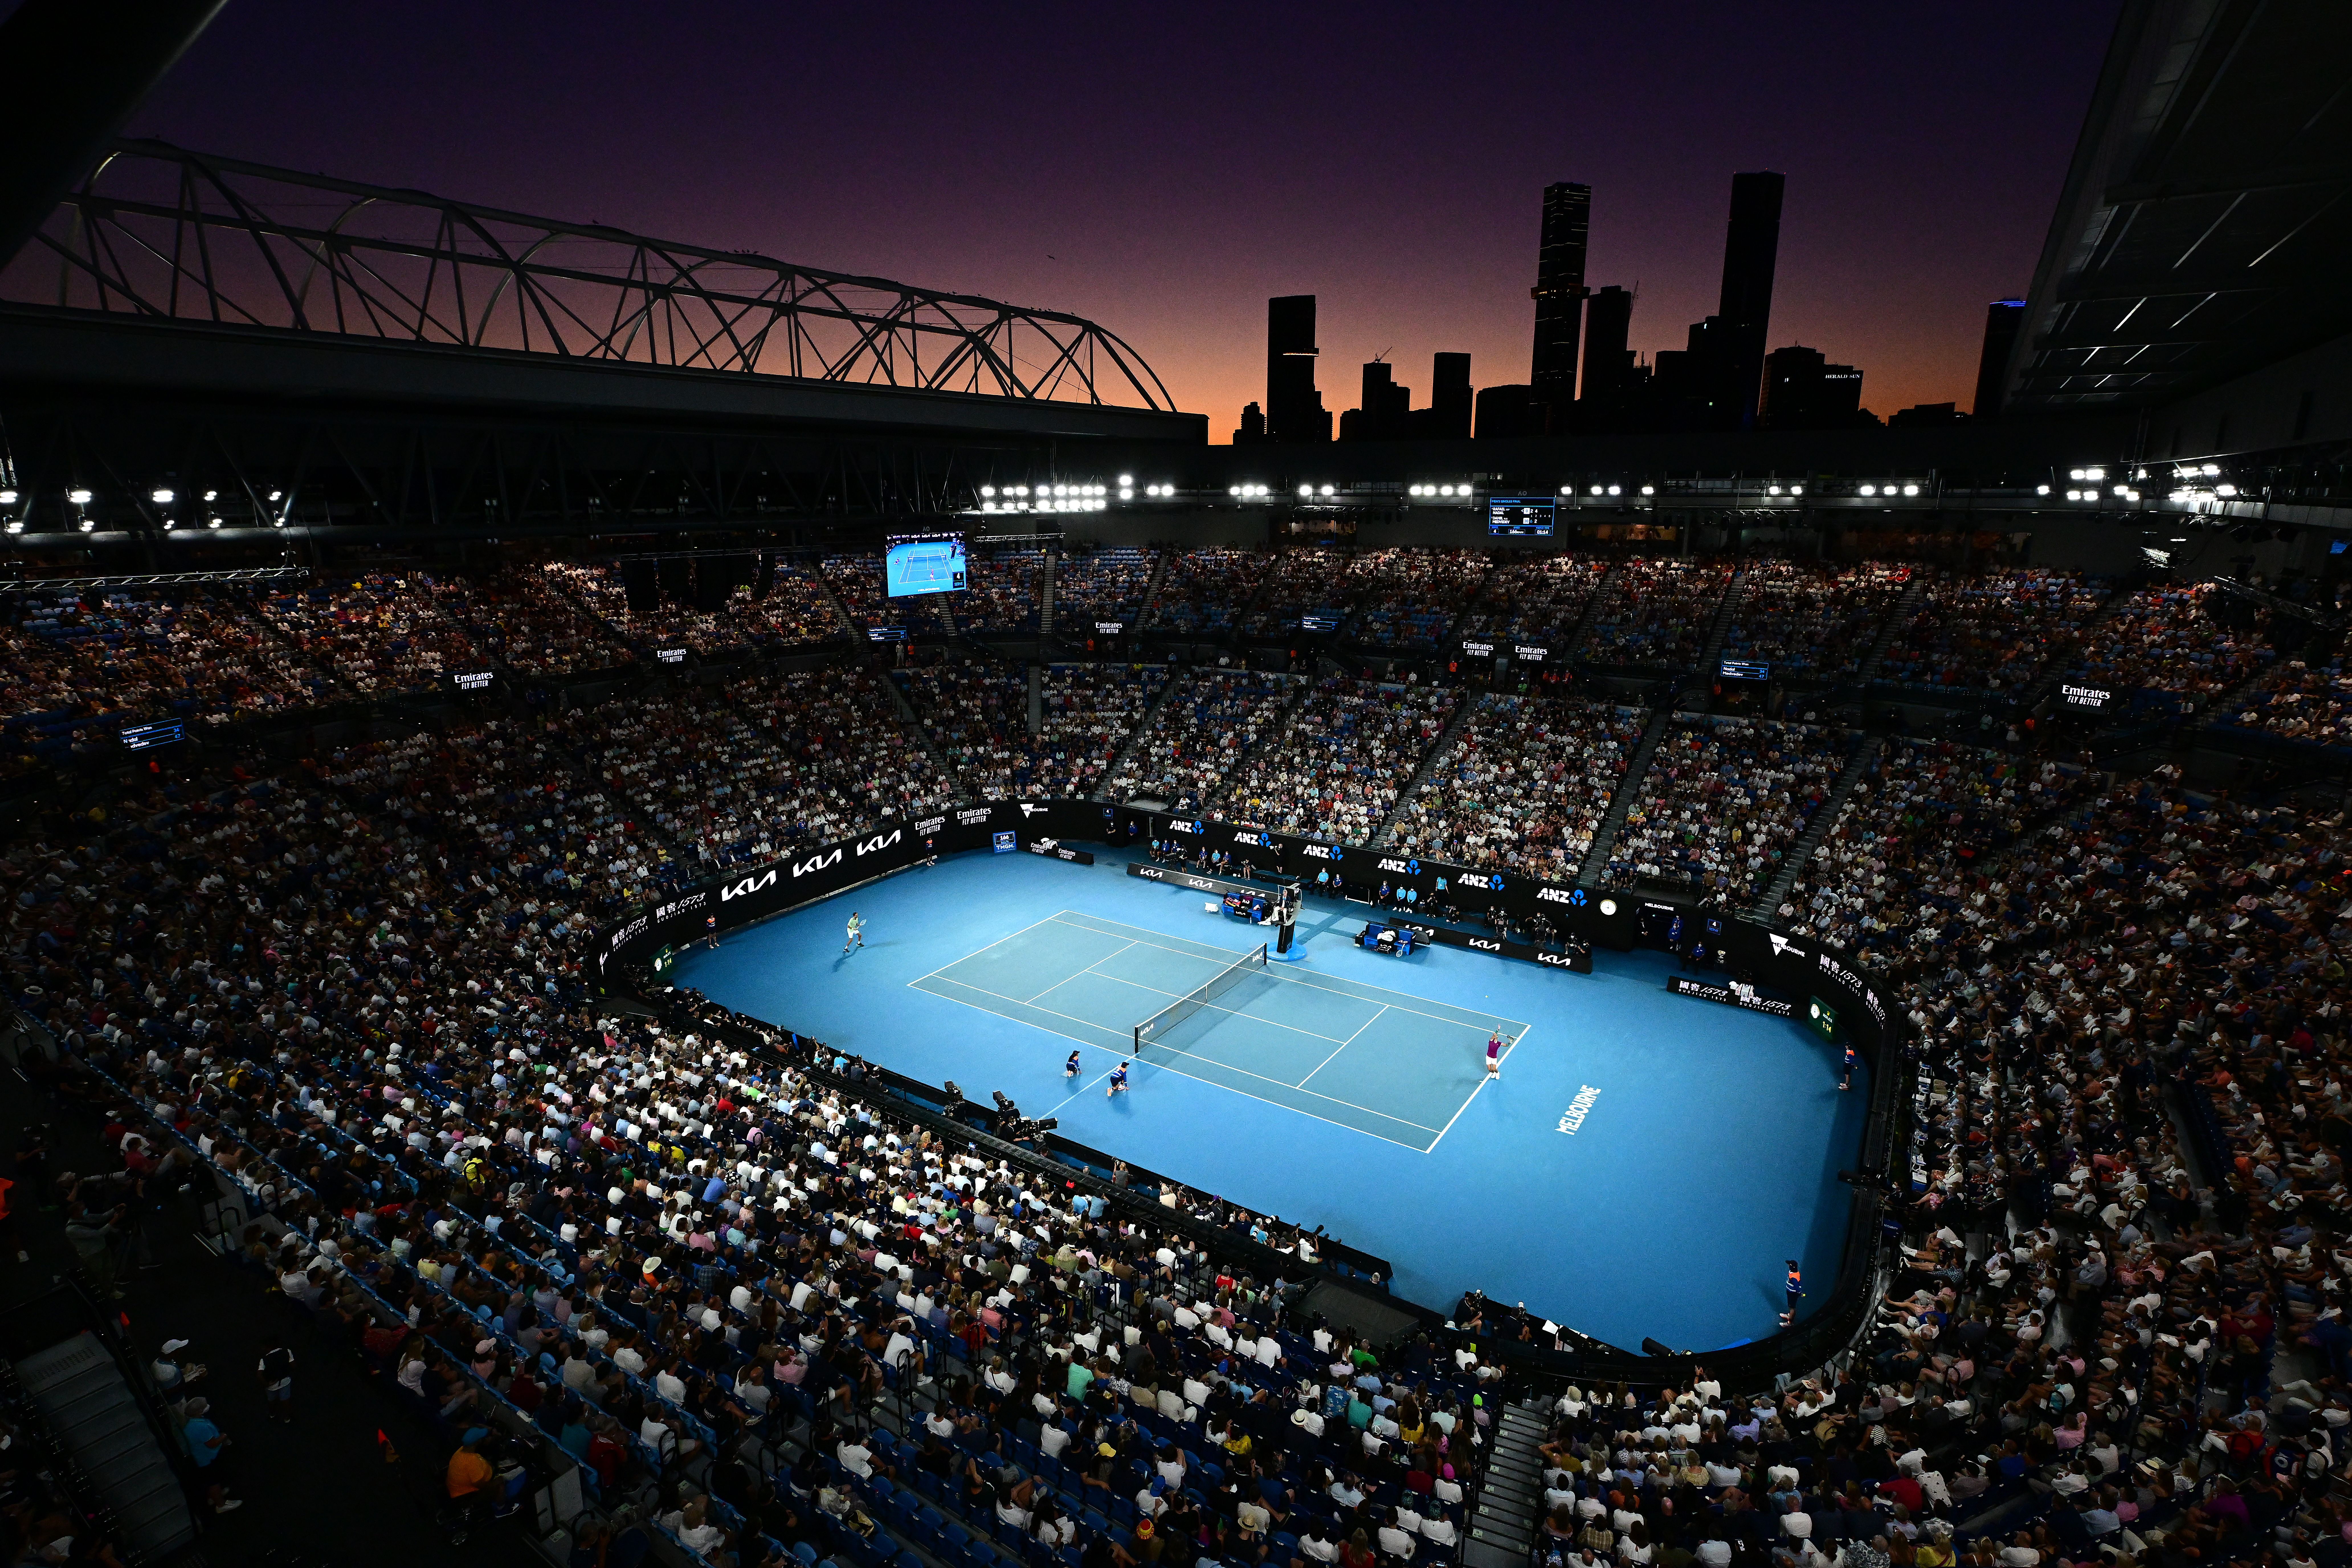 A general view of Rod Laver Arena during the Men's Singles Final match between Rafael Nadal of Spain and Daniil Medvedev of Russia during day 14 of the 2022 Australian Open at Melbourne Park on January 30, 2022 in Melbourne, Australia.